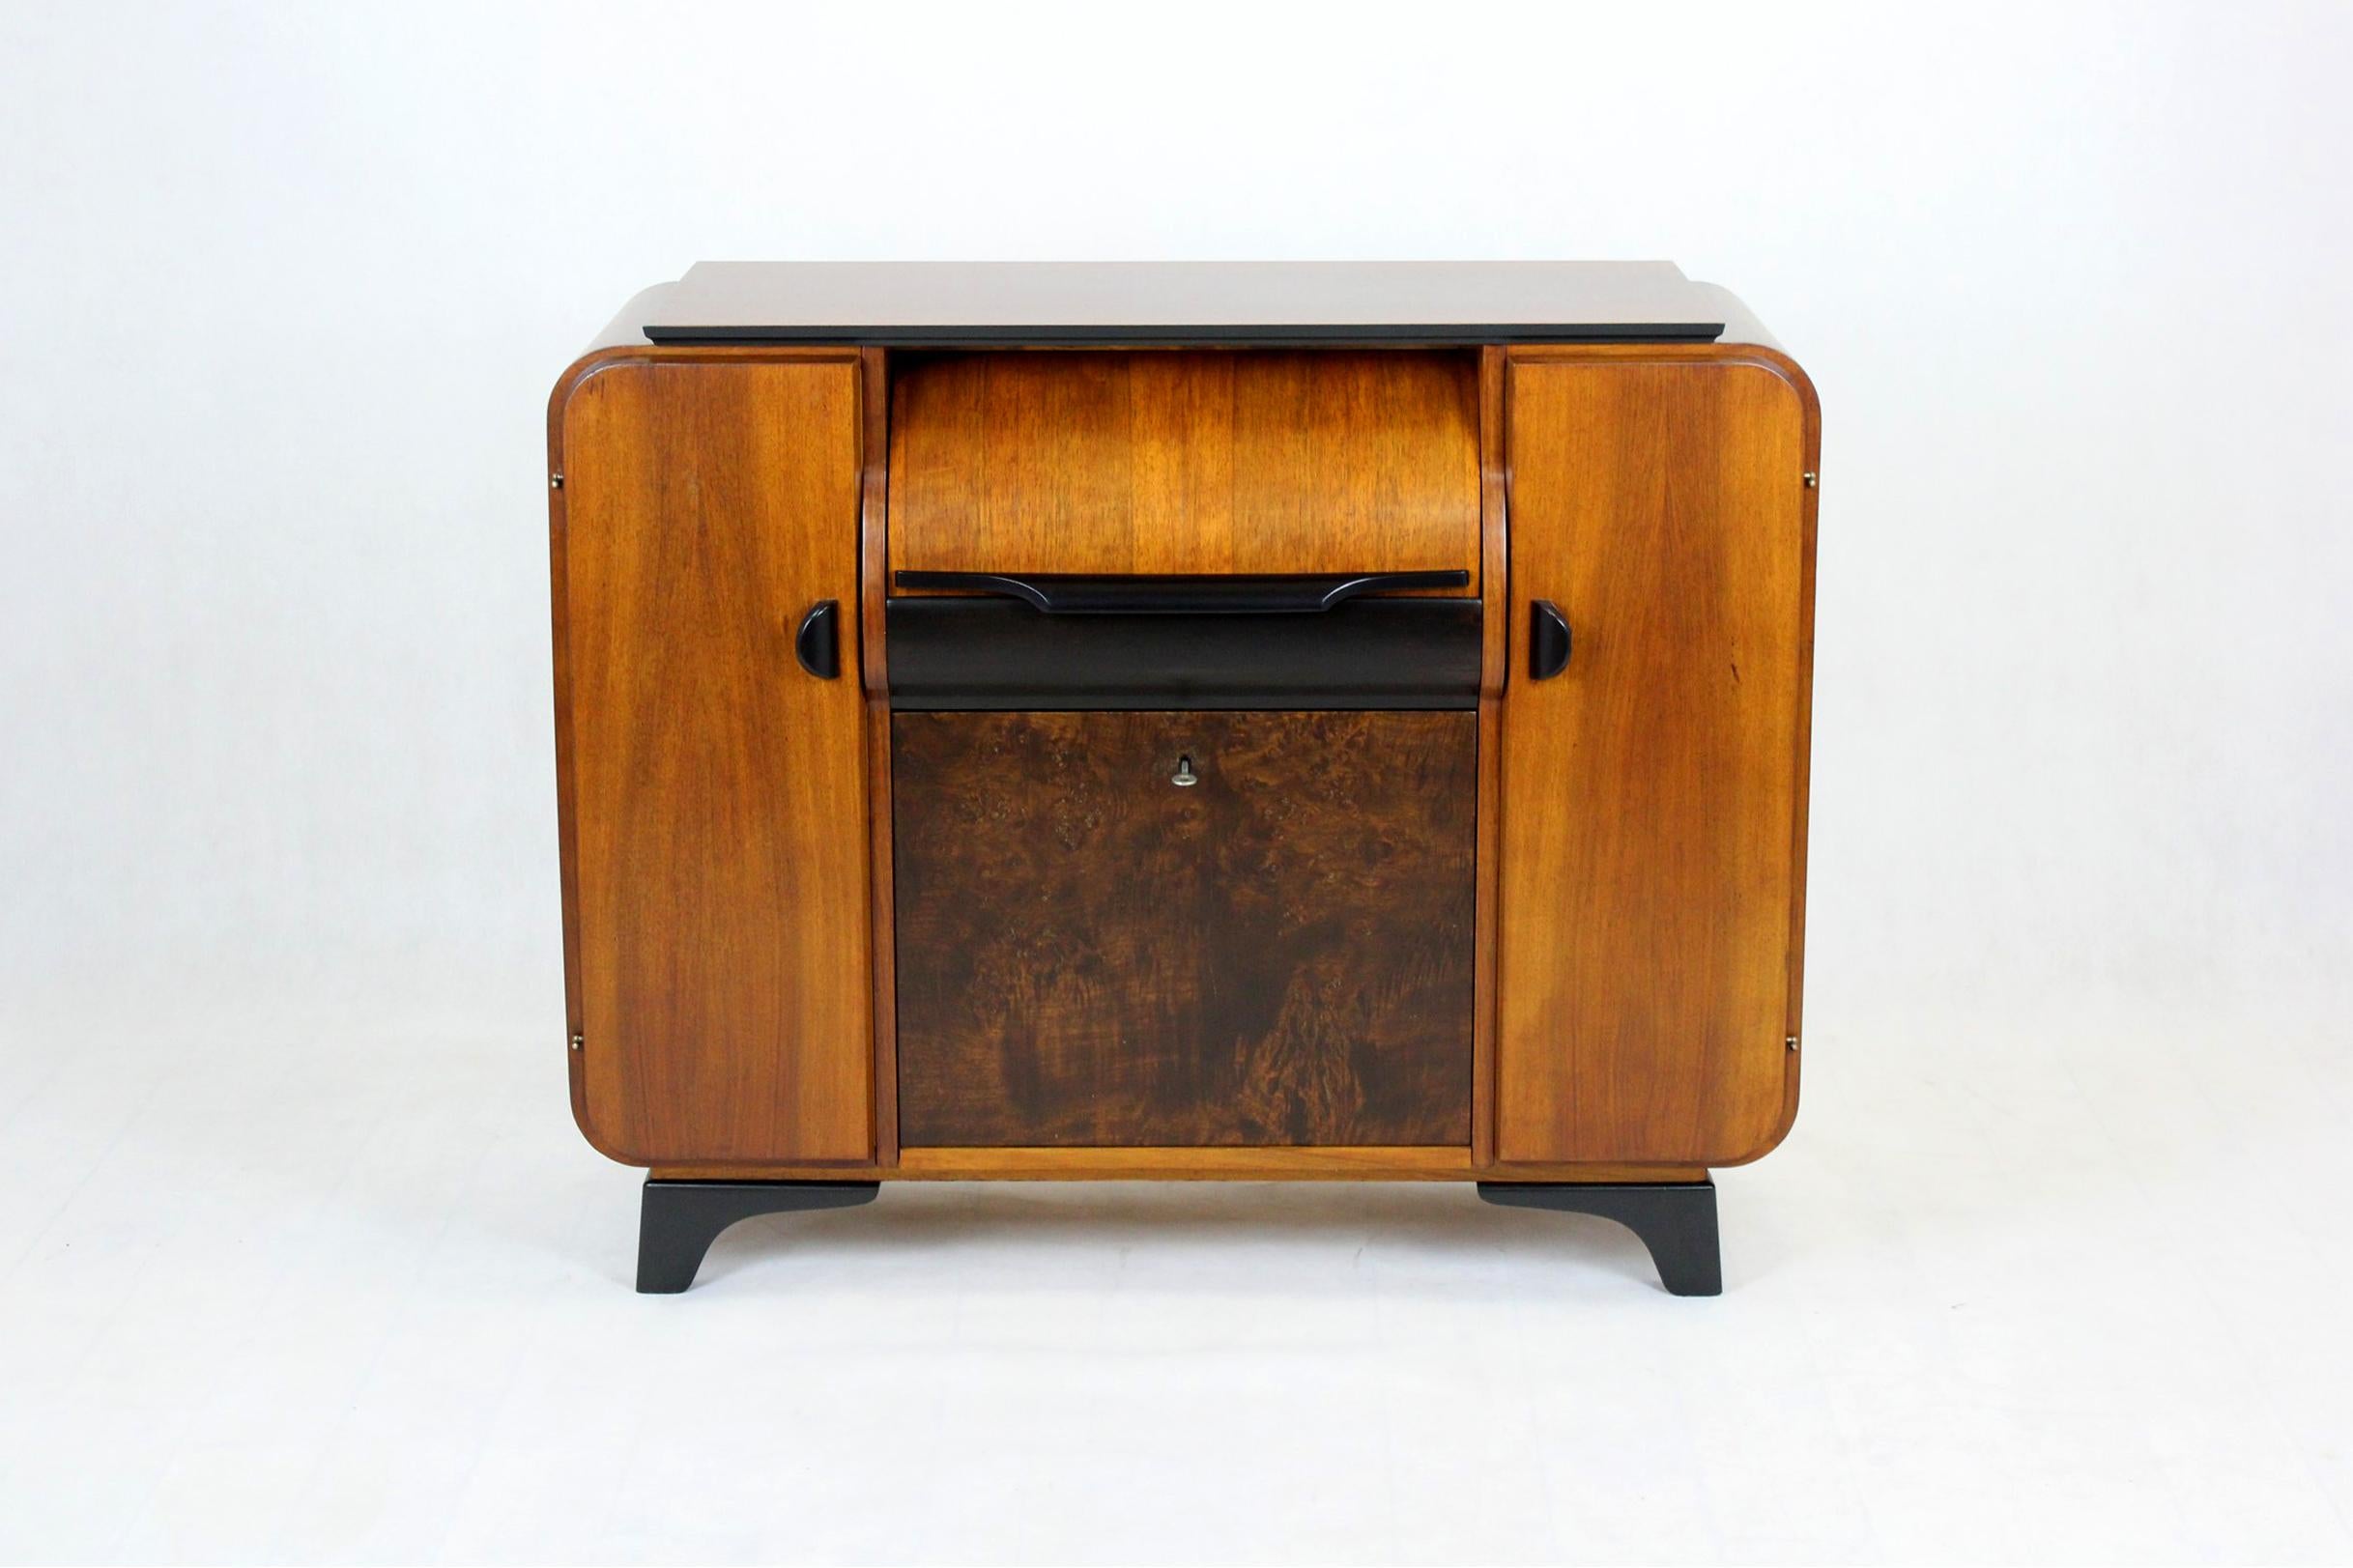 Record cabinet in walnut, designed by Jindrich Halabala and manufactured by Supraphon in 1958. Contains a lot of shelves for gramophone records. The record player is placed behind the flap. The cabinet is kept in very good condition, has been